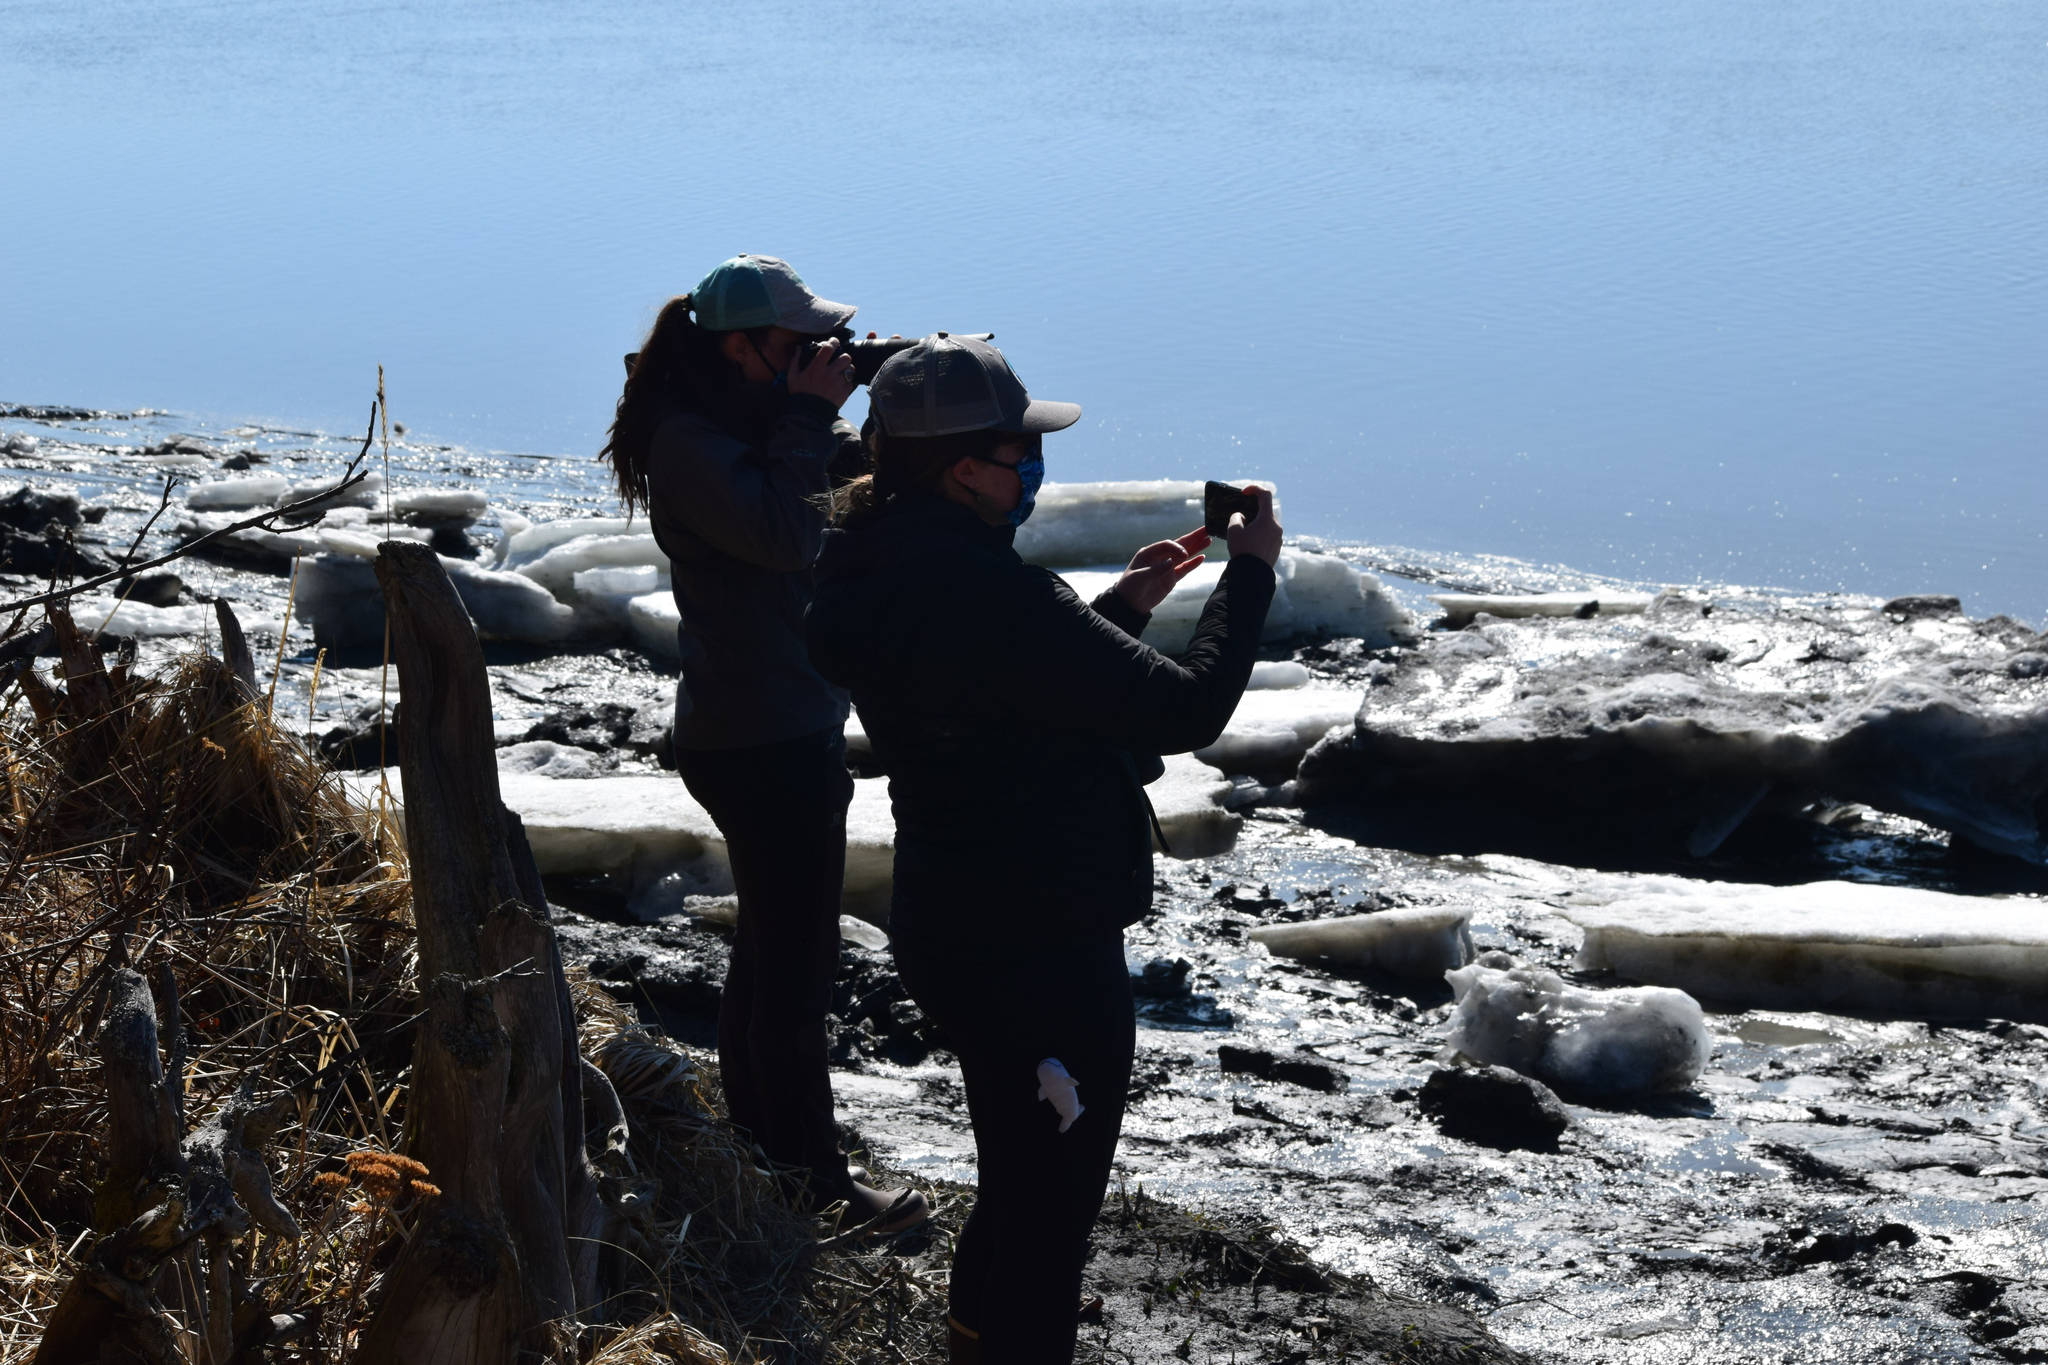 Madison Kosma (left) and Suzanne Steinert watch as beluga whales swim up the Kenai River at Cunningham Park on Saturday, April 24, 2021. (Photo by Camille Botello/Peninsula Clarion)